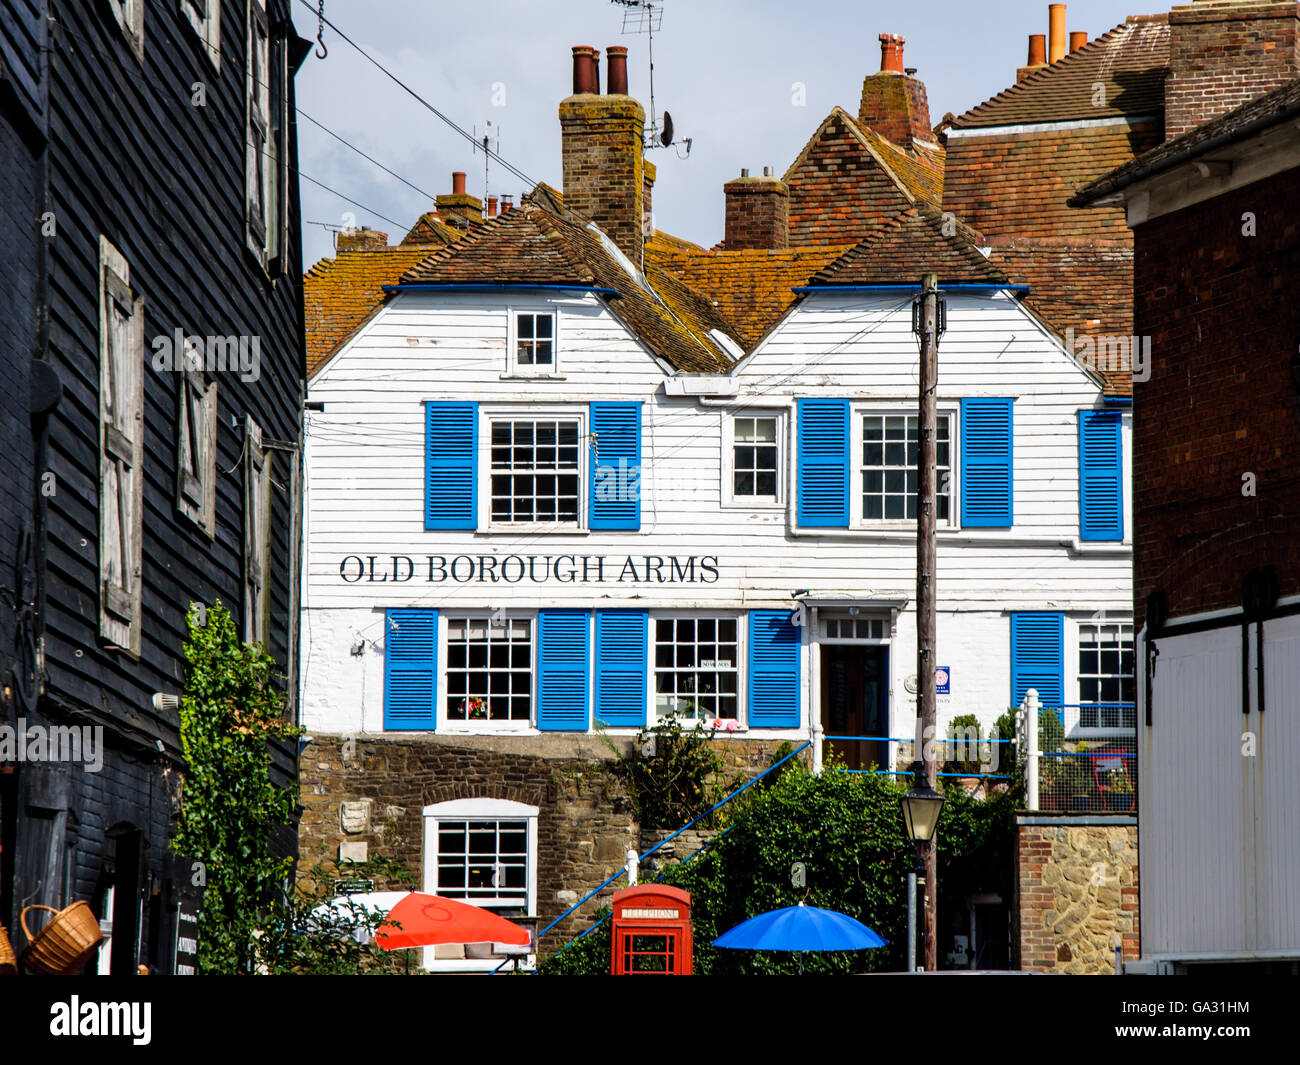 Rye town, Old Borough Arms Hotel in local clapboard and shutters style Stock Photo